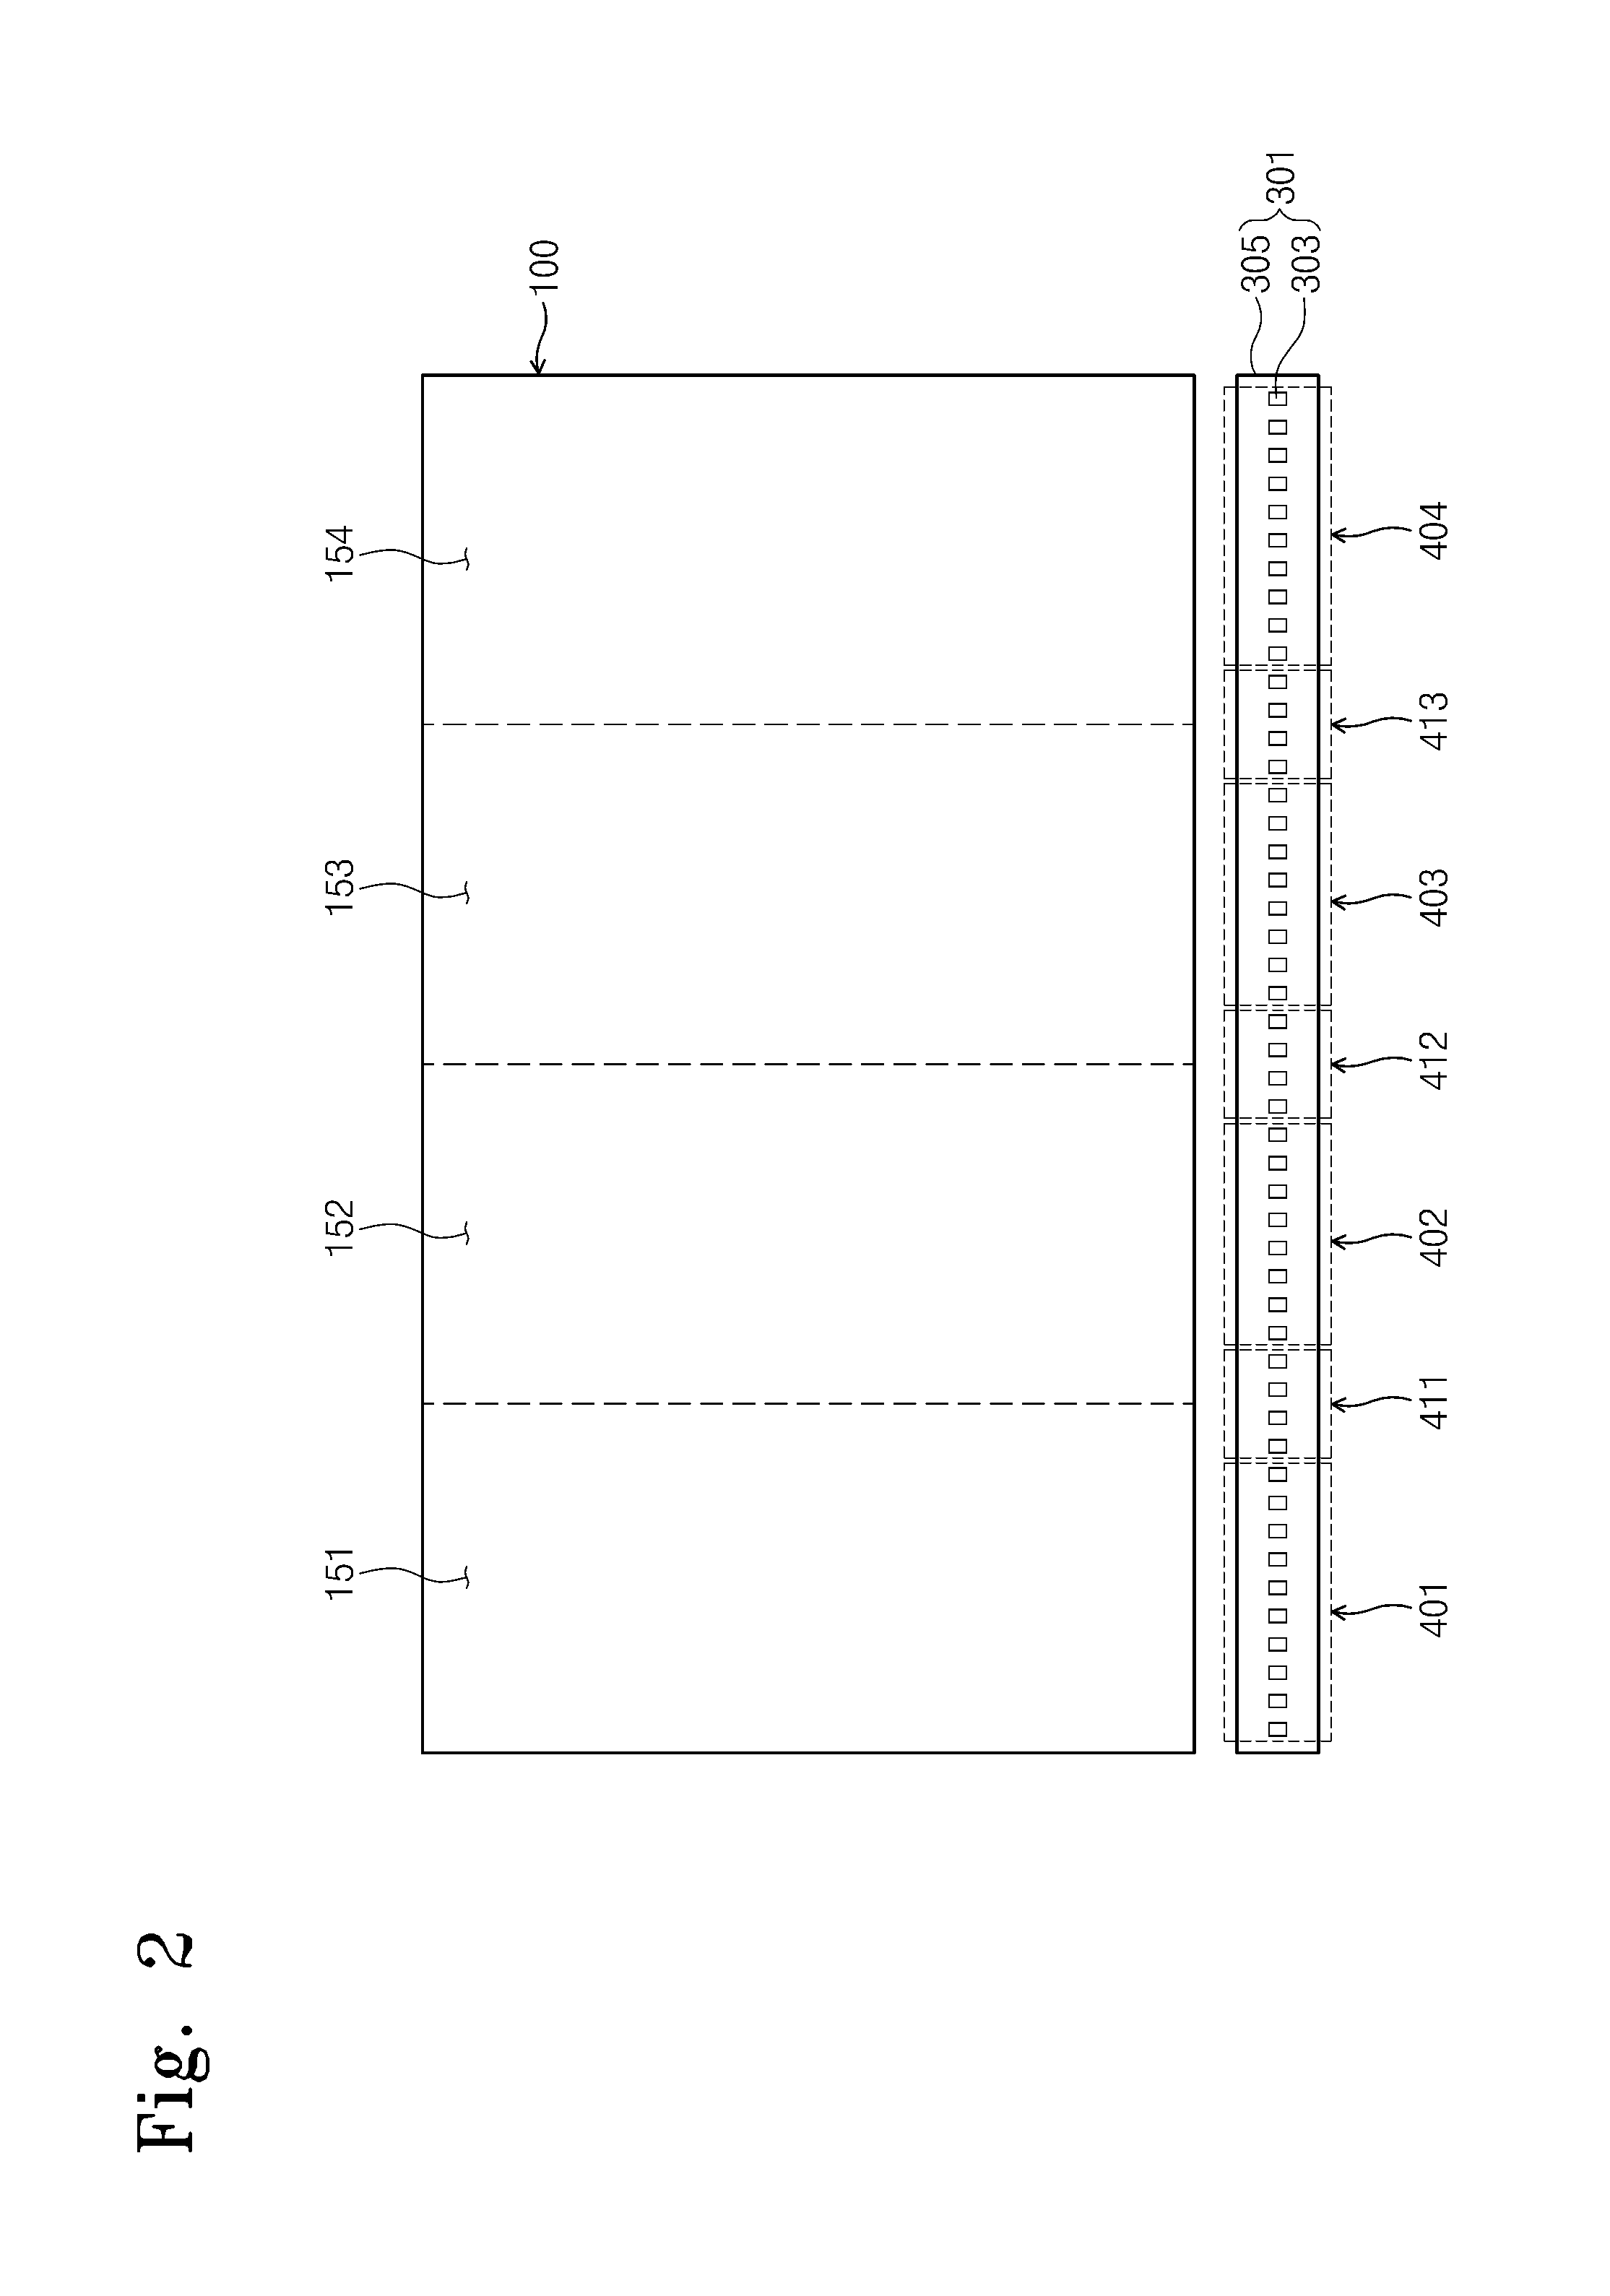 Display apparatus including sub-light source groups